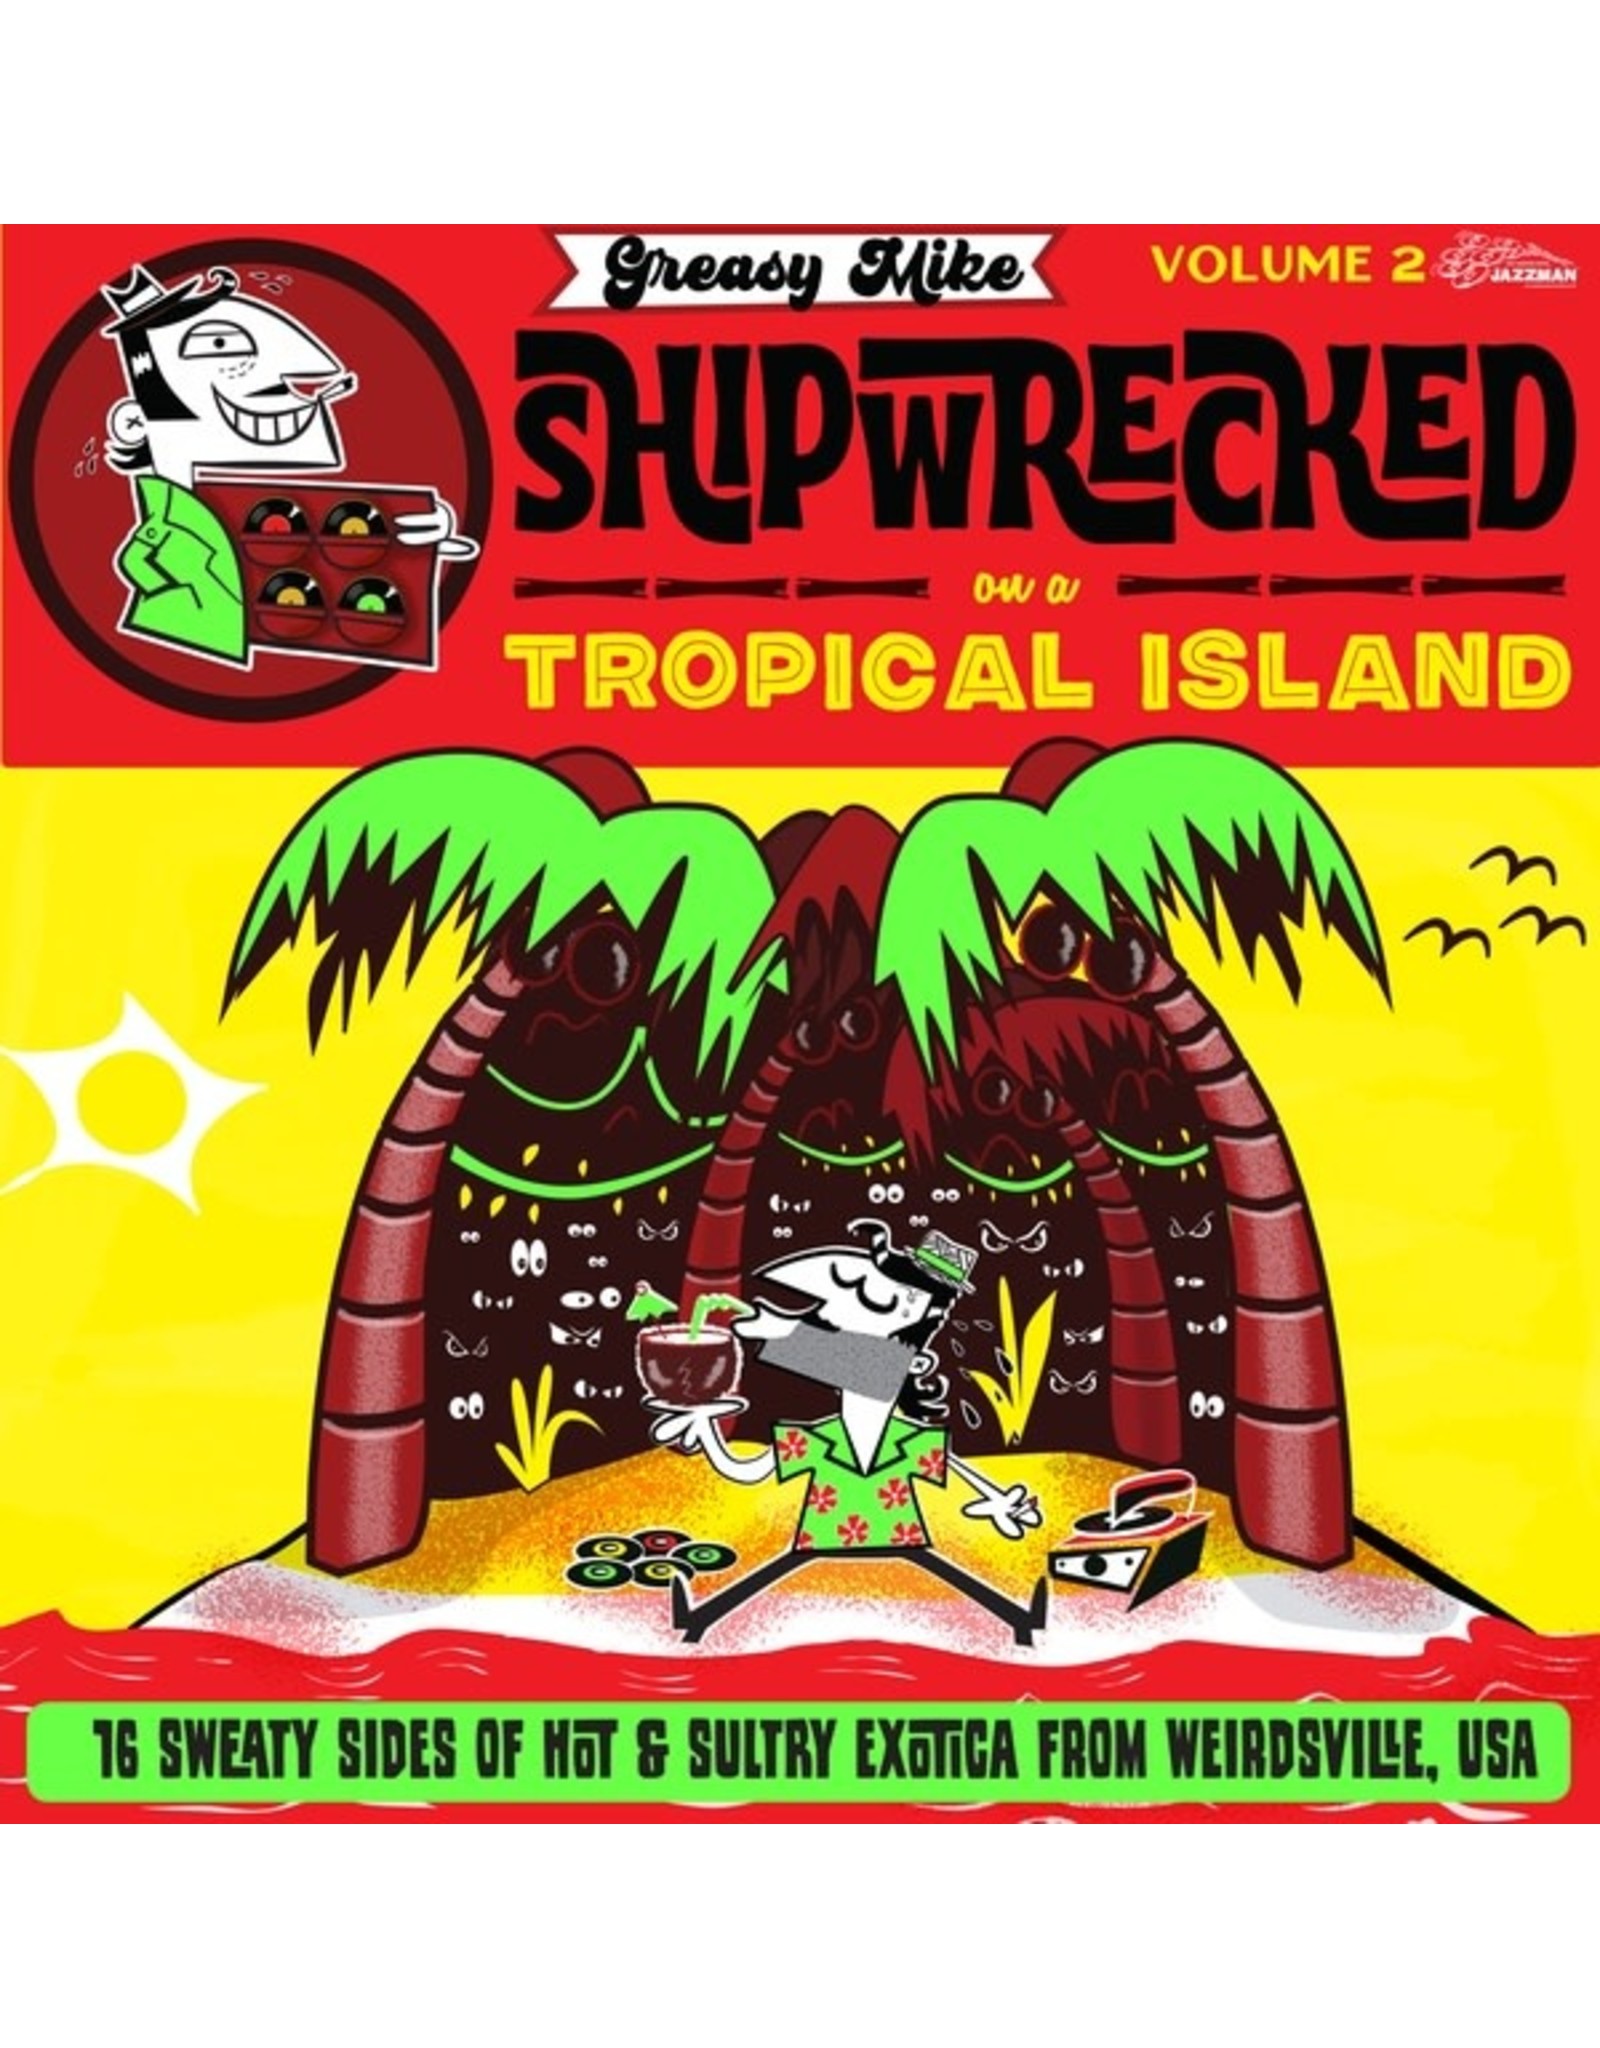 Jazzman Various: Greasy Mike - Shipwrecked on a Tropical Island LP